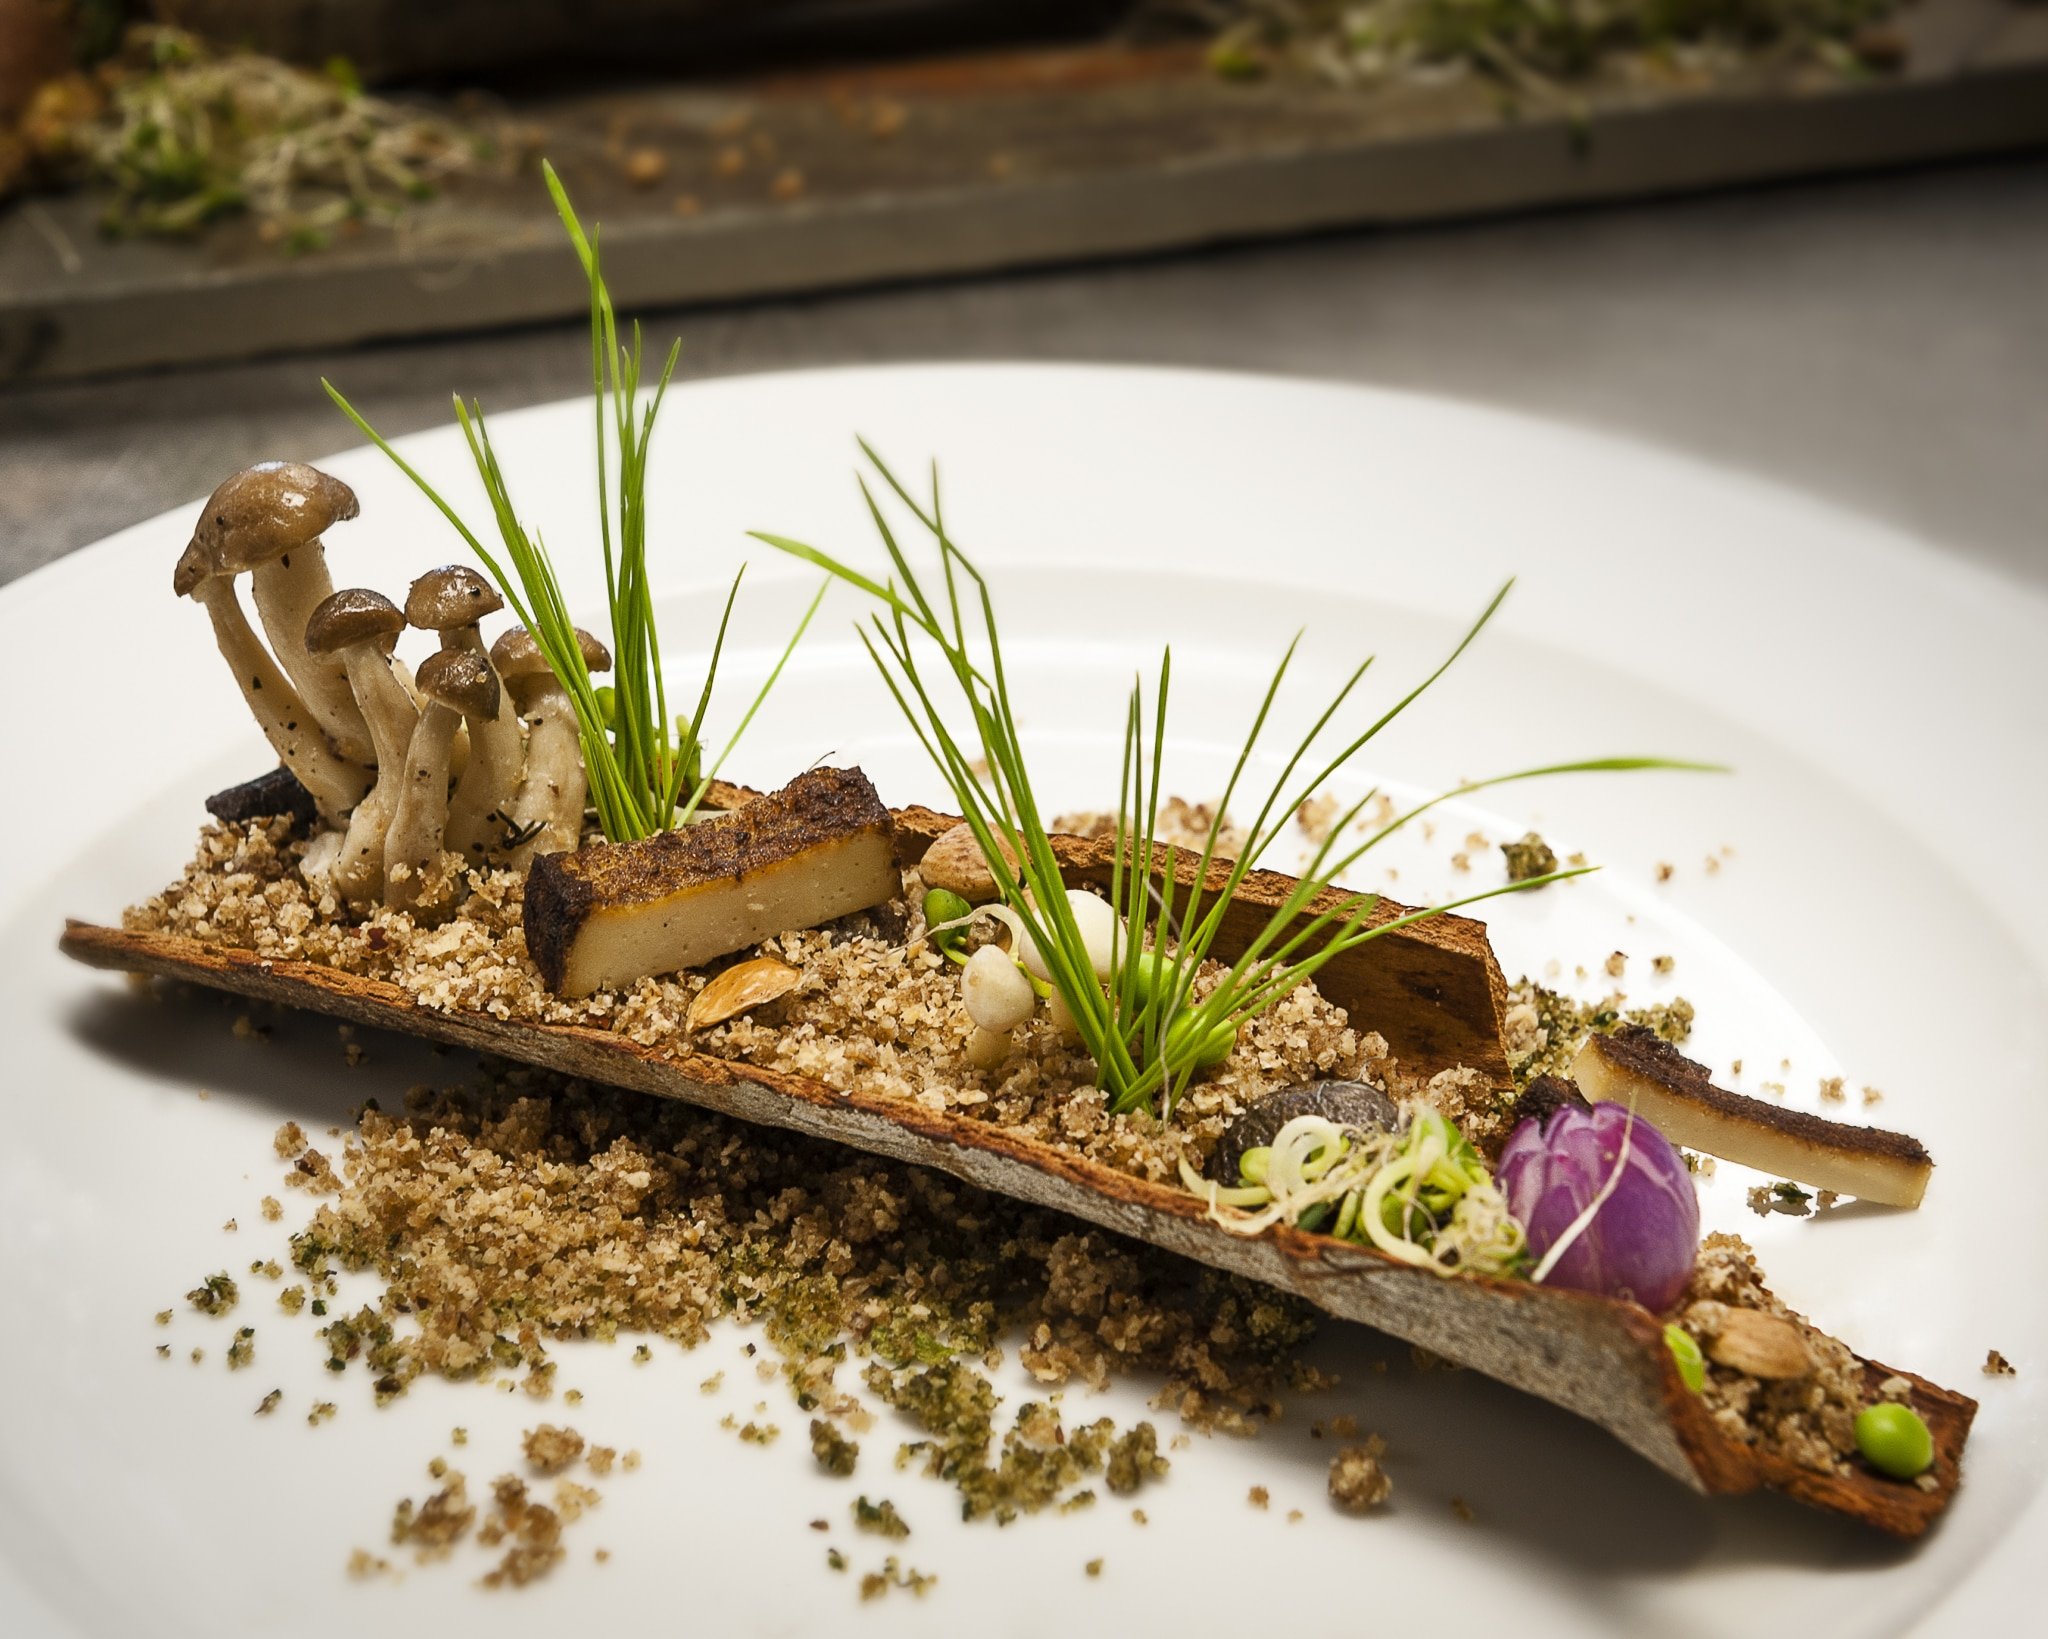 A culinary plate inspired by Noma interprets a scene from nature with a log containing mushrooms and edible dirt.